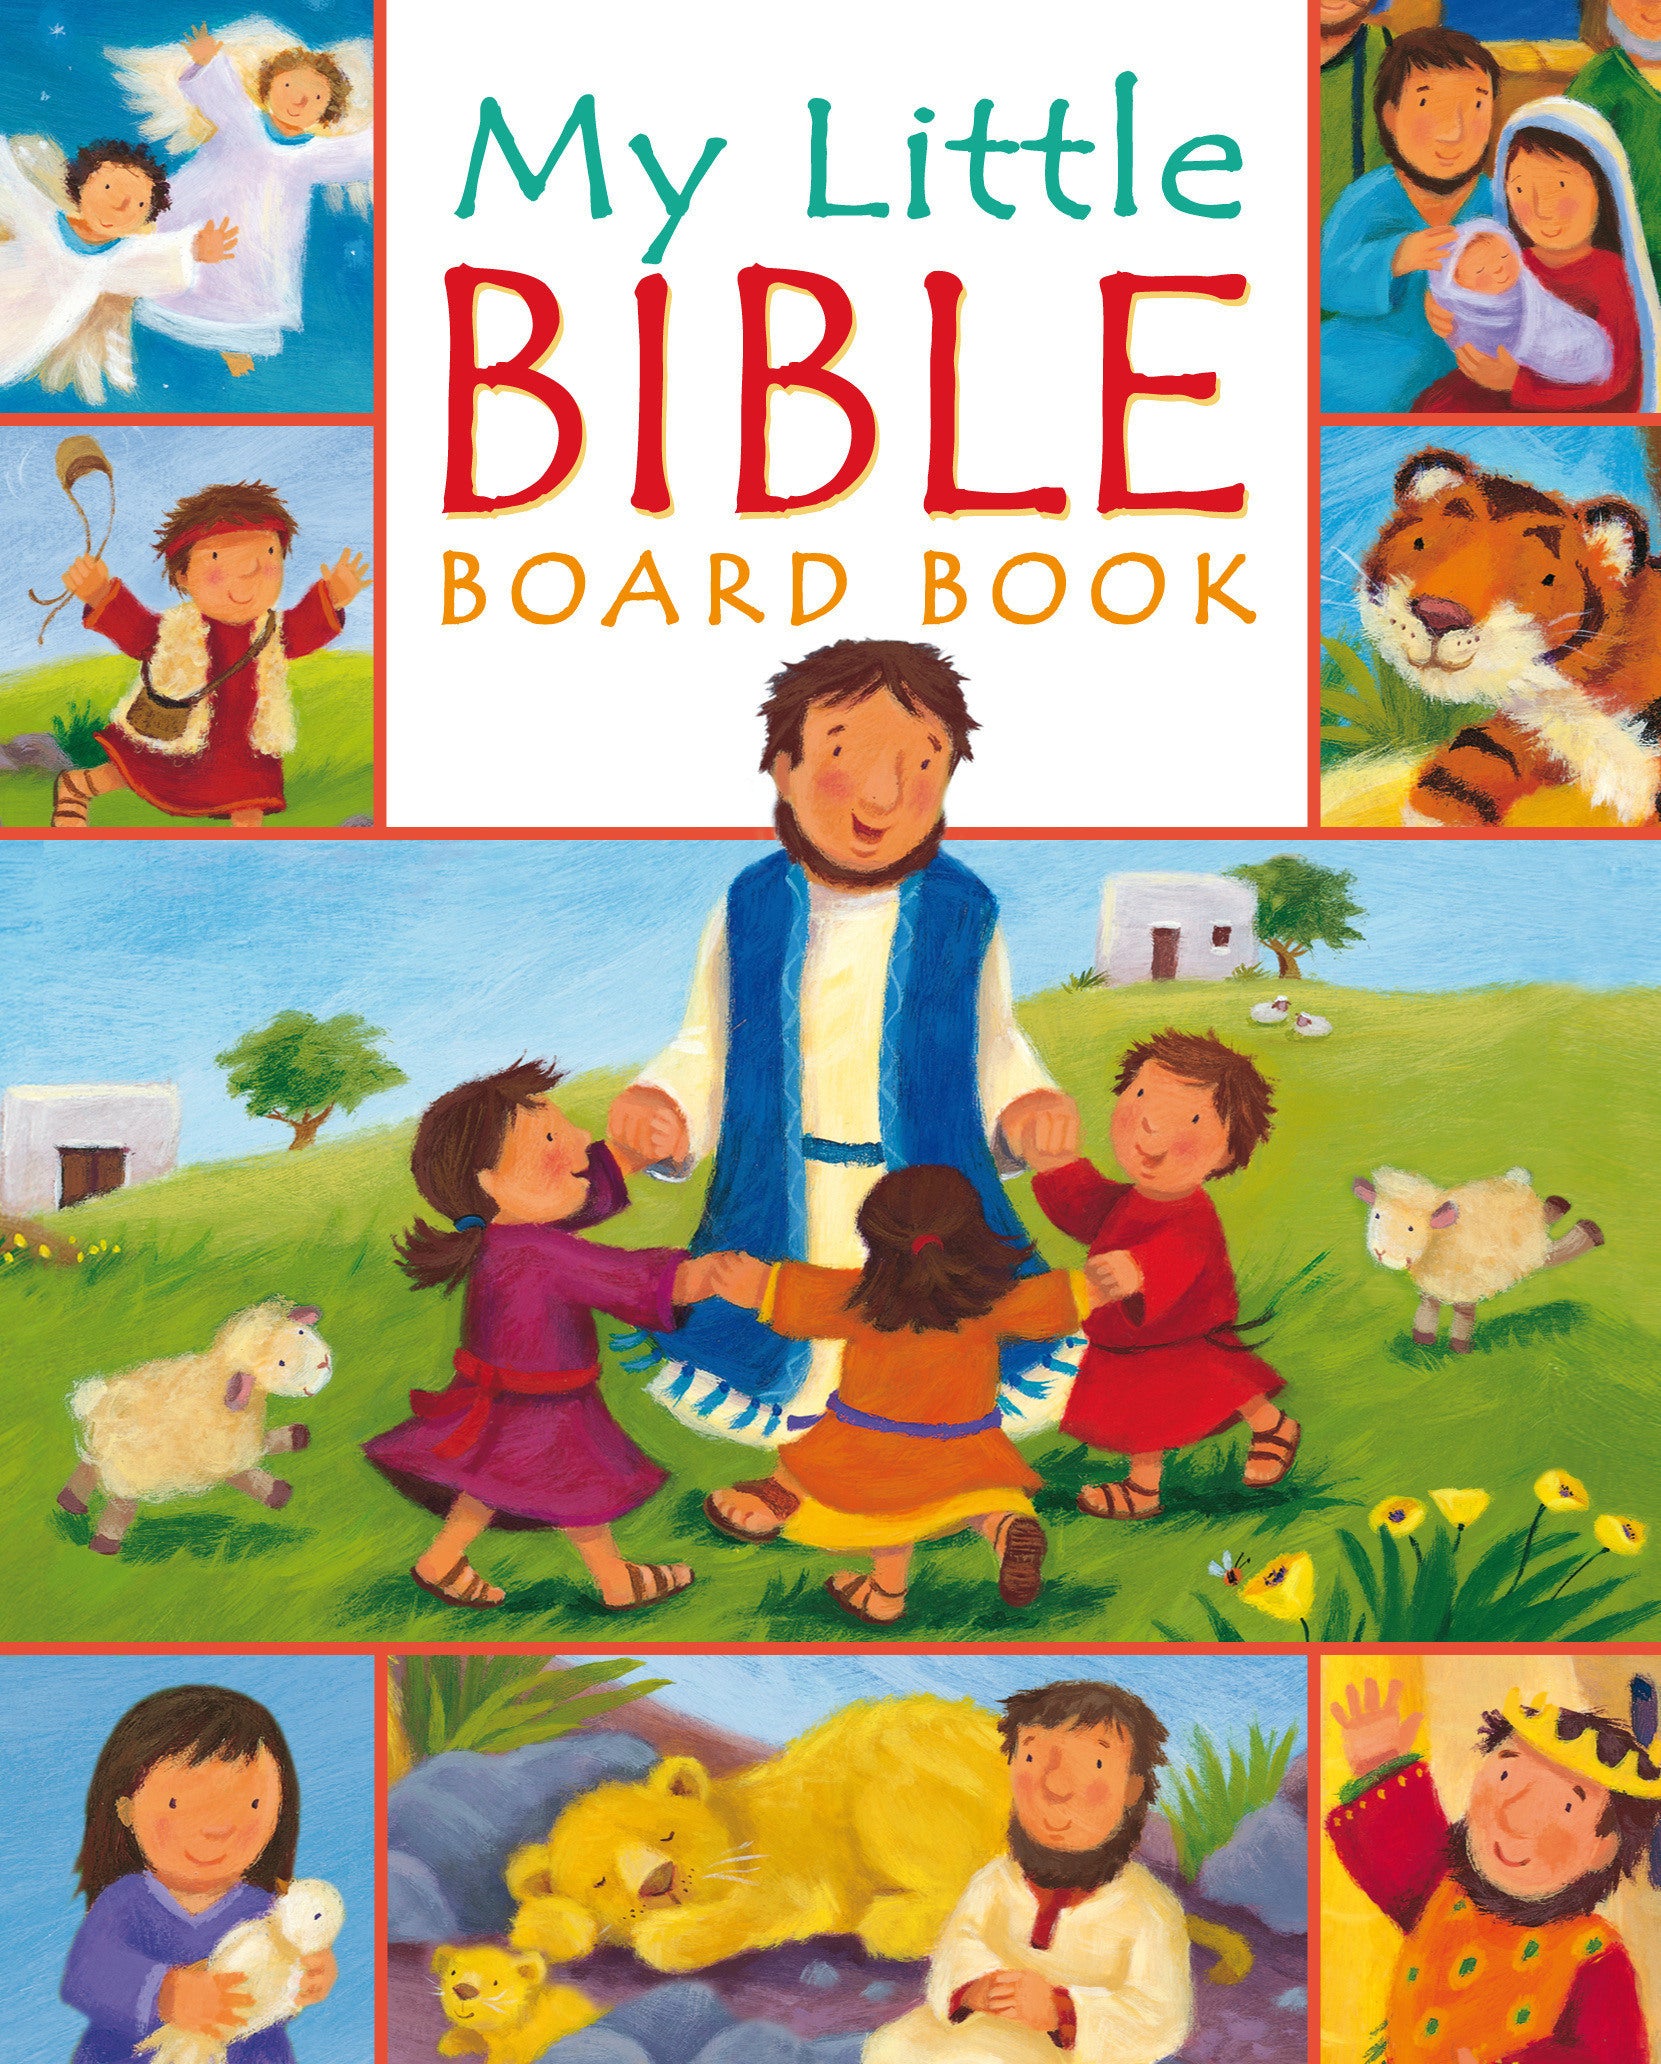 Image of My Little Bible Board Book other